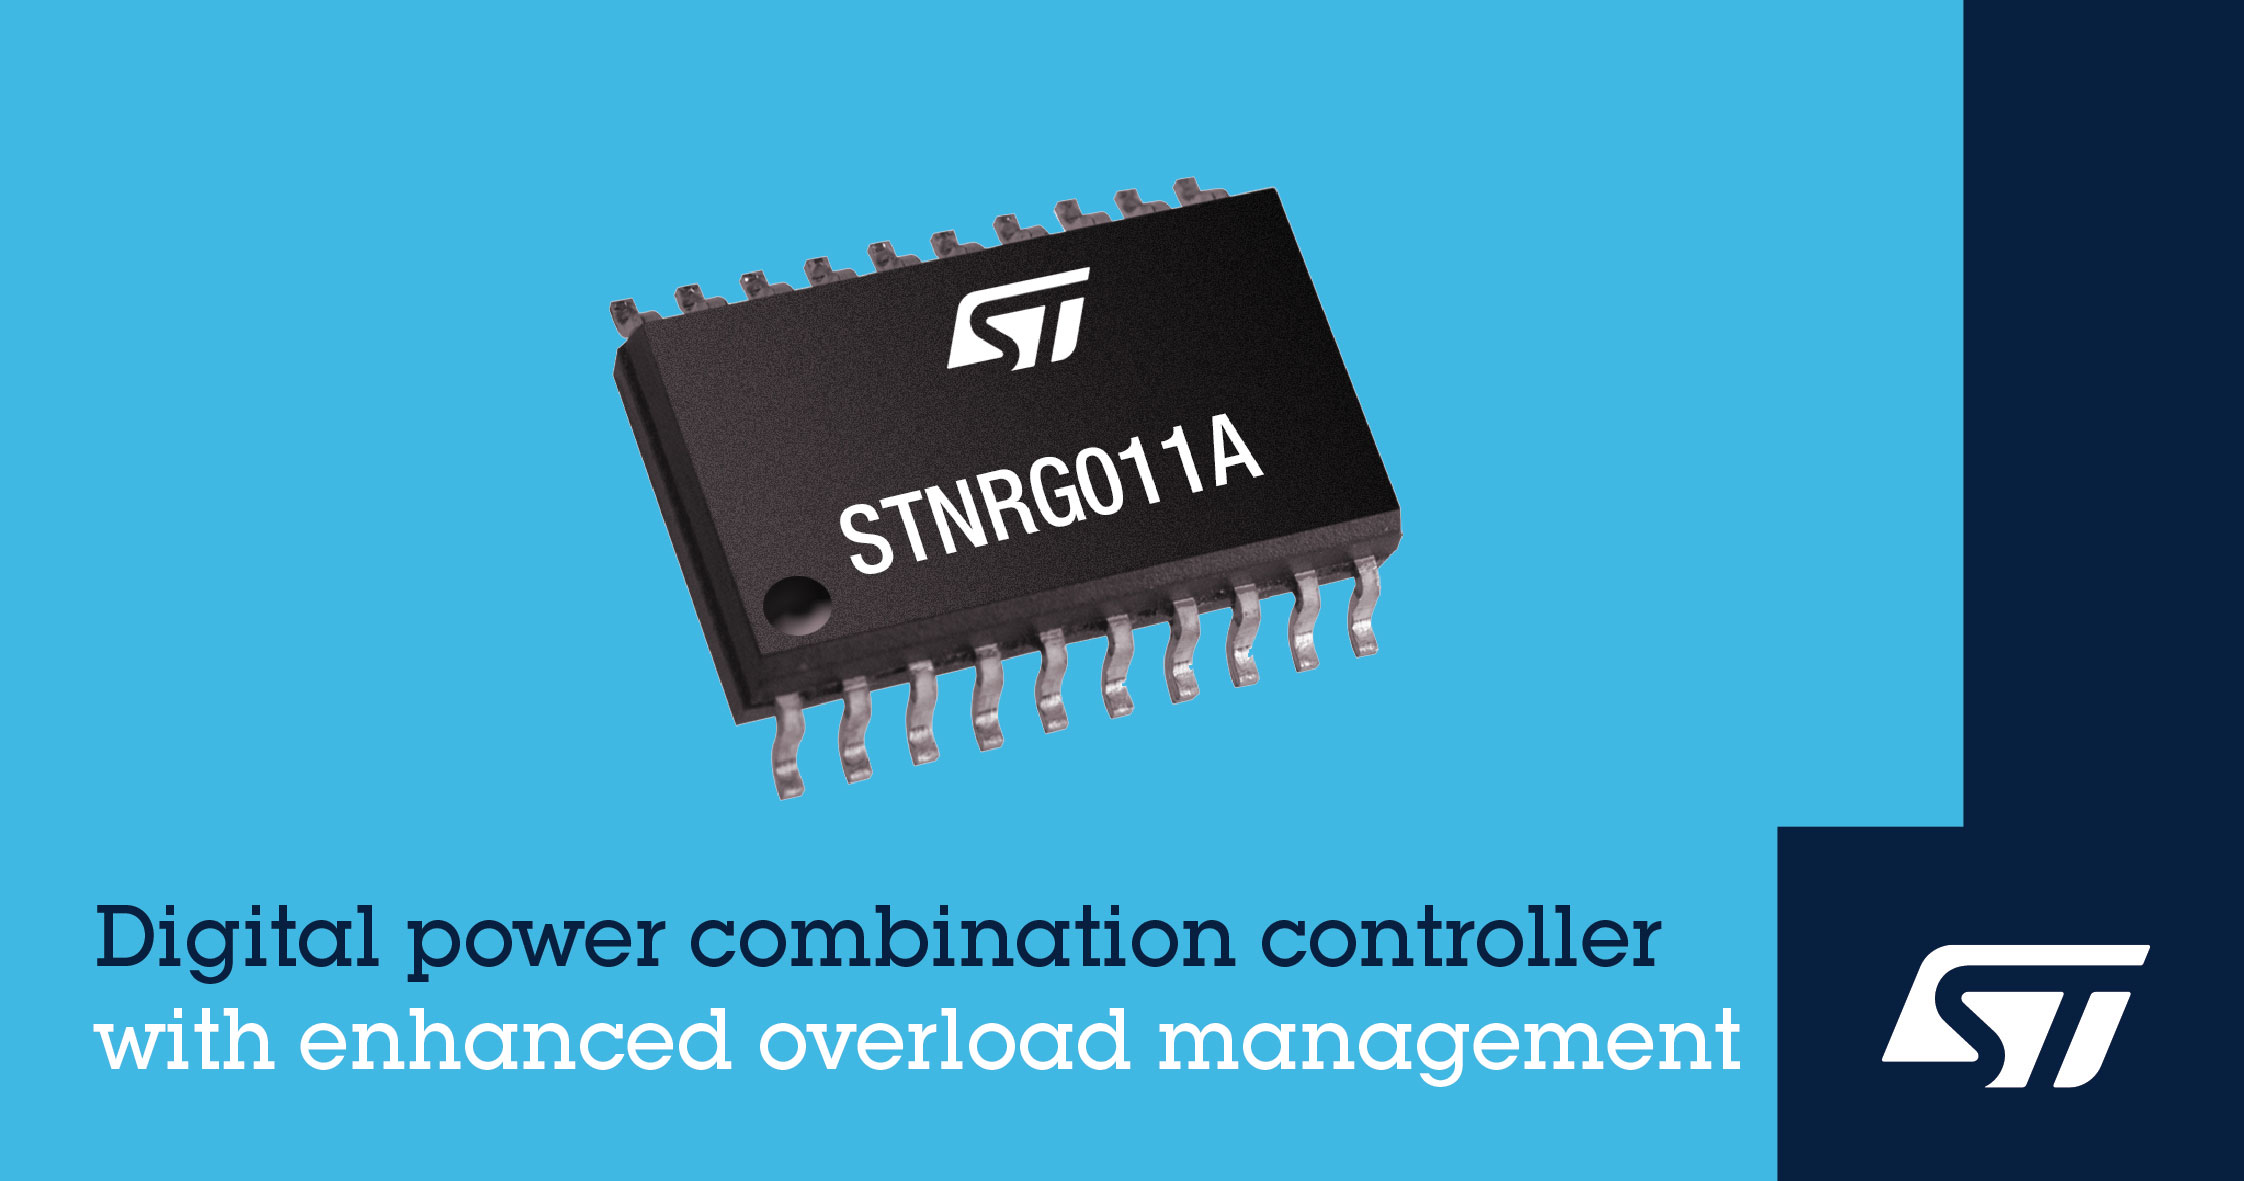 STMicroelectronics Enhances Digital Power Combination Controller for Overload Stability and Regulation